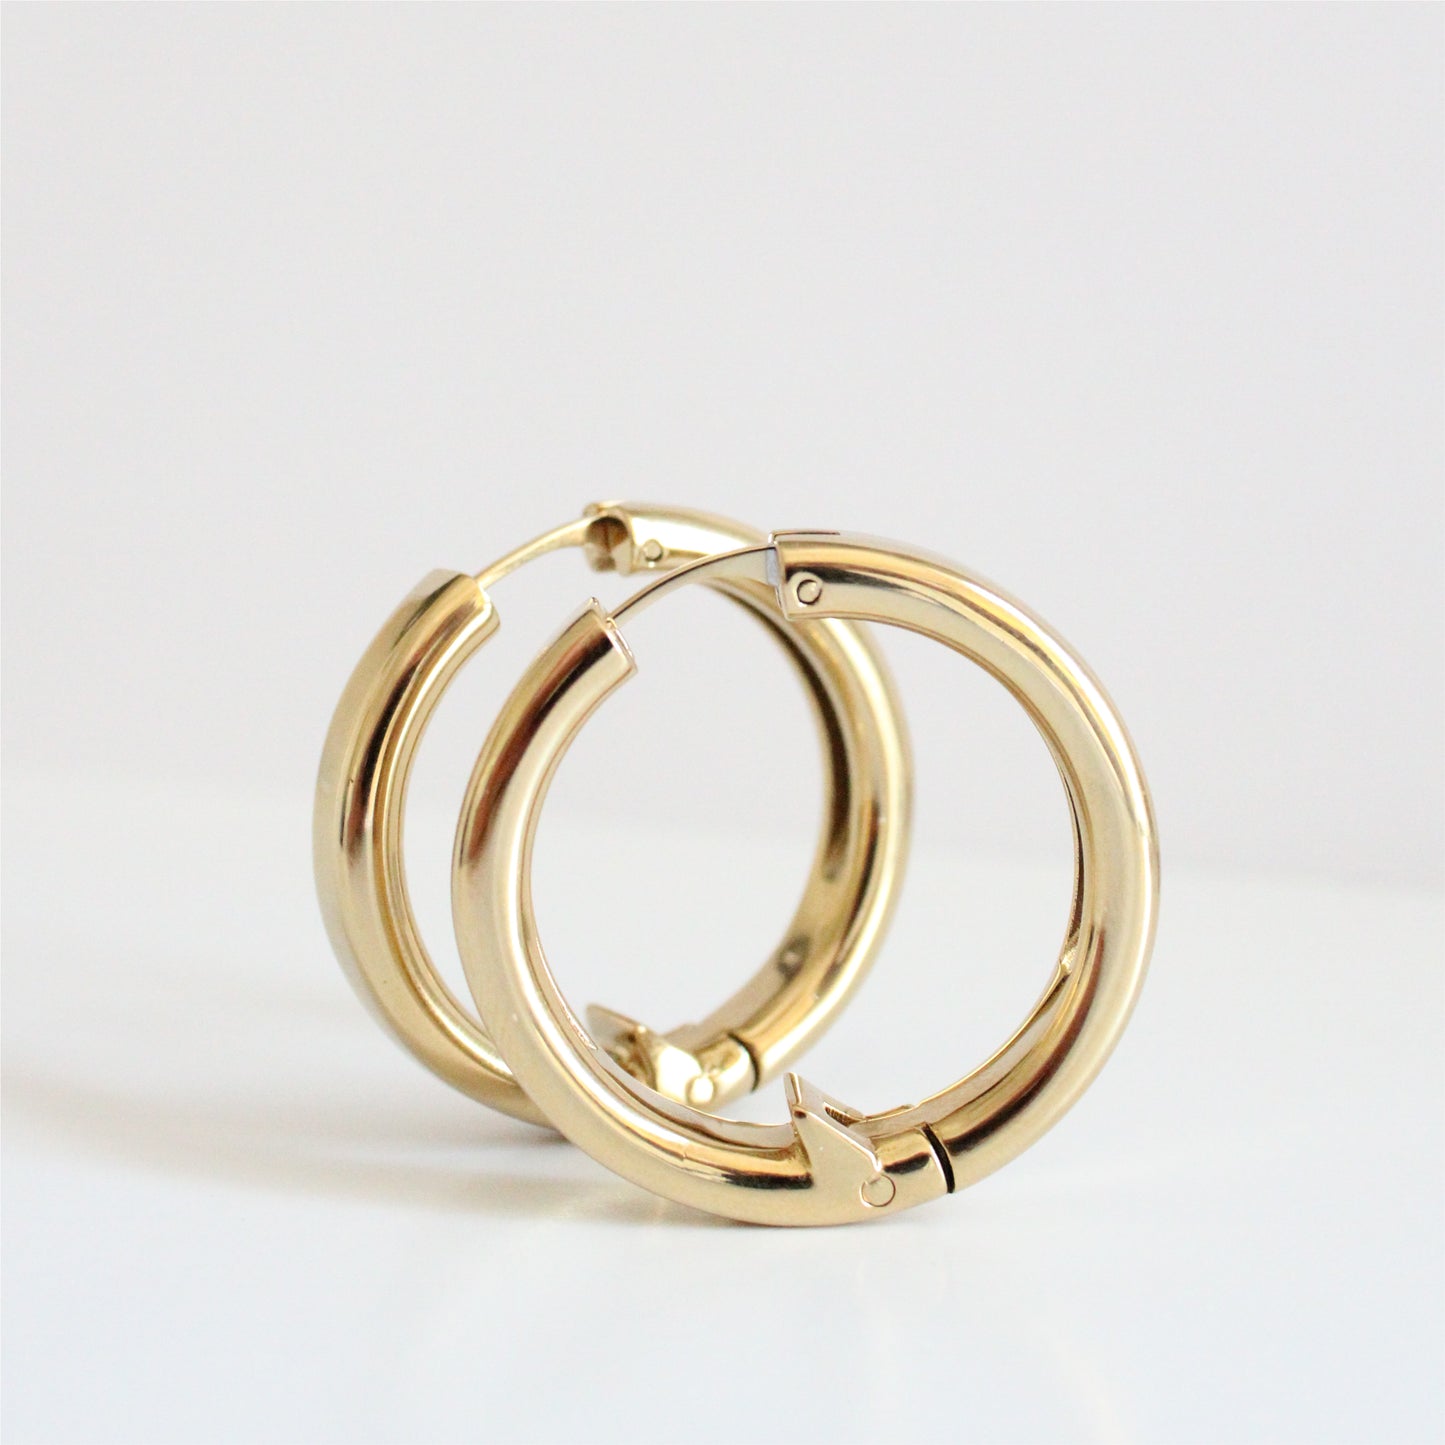 Designed to be the perfect finishing touch to any outfit, these simple and streamlined hoops function as a bottle opener. Like rays of sunshine, these are gold-plated stainless steel hoops that add touches of warmth.